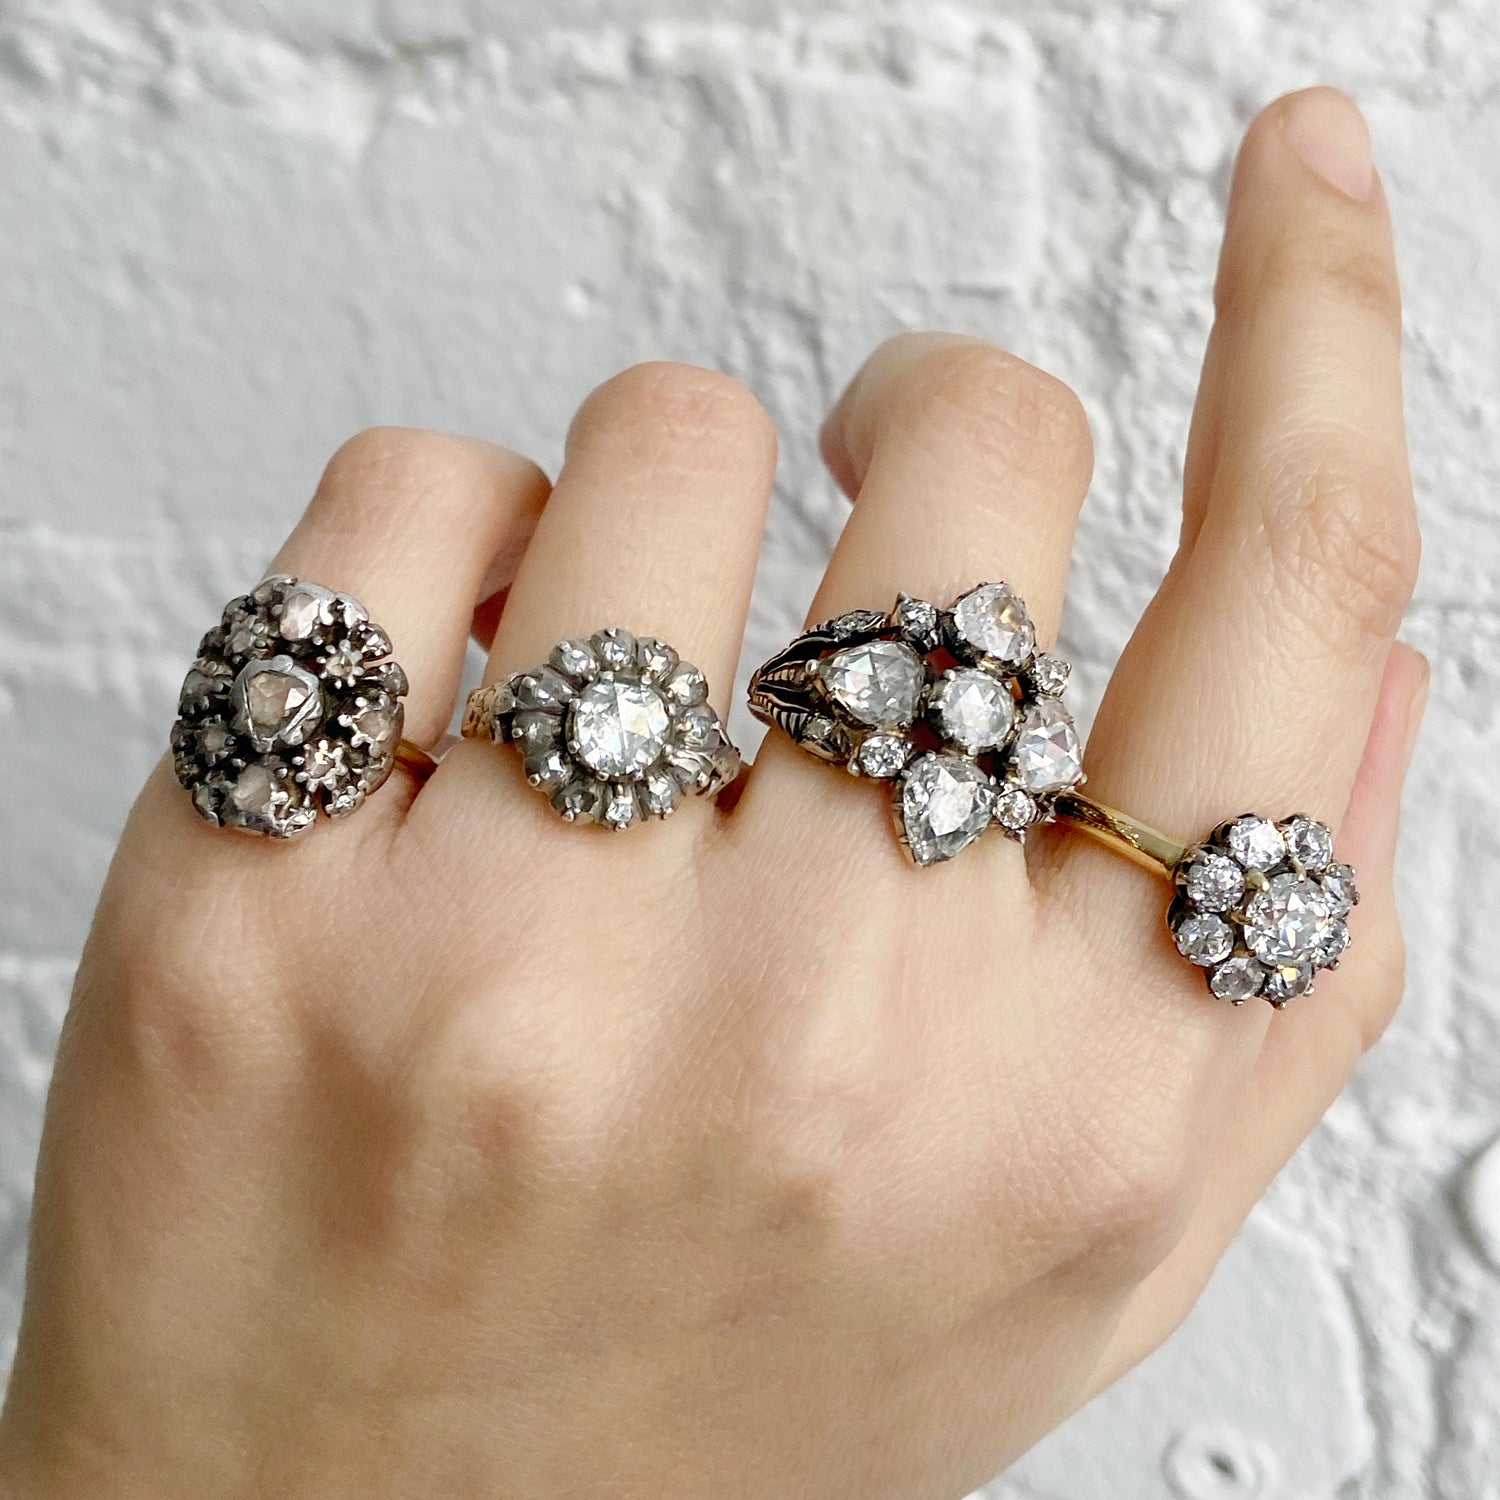 Erstwhile Jewelry: NYC Destination for Vintage Engagement Rings  (@erstwhilejewelry) • Instagram photos and videos